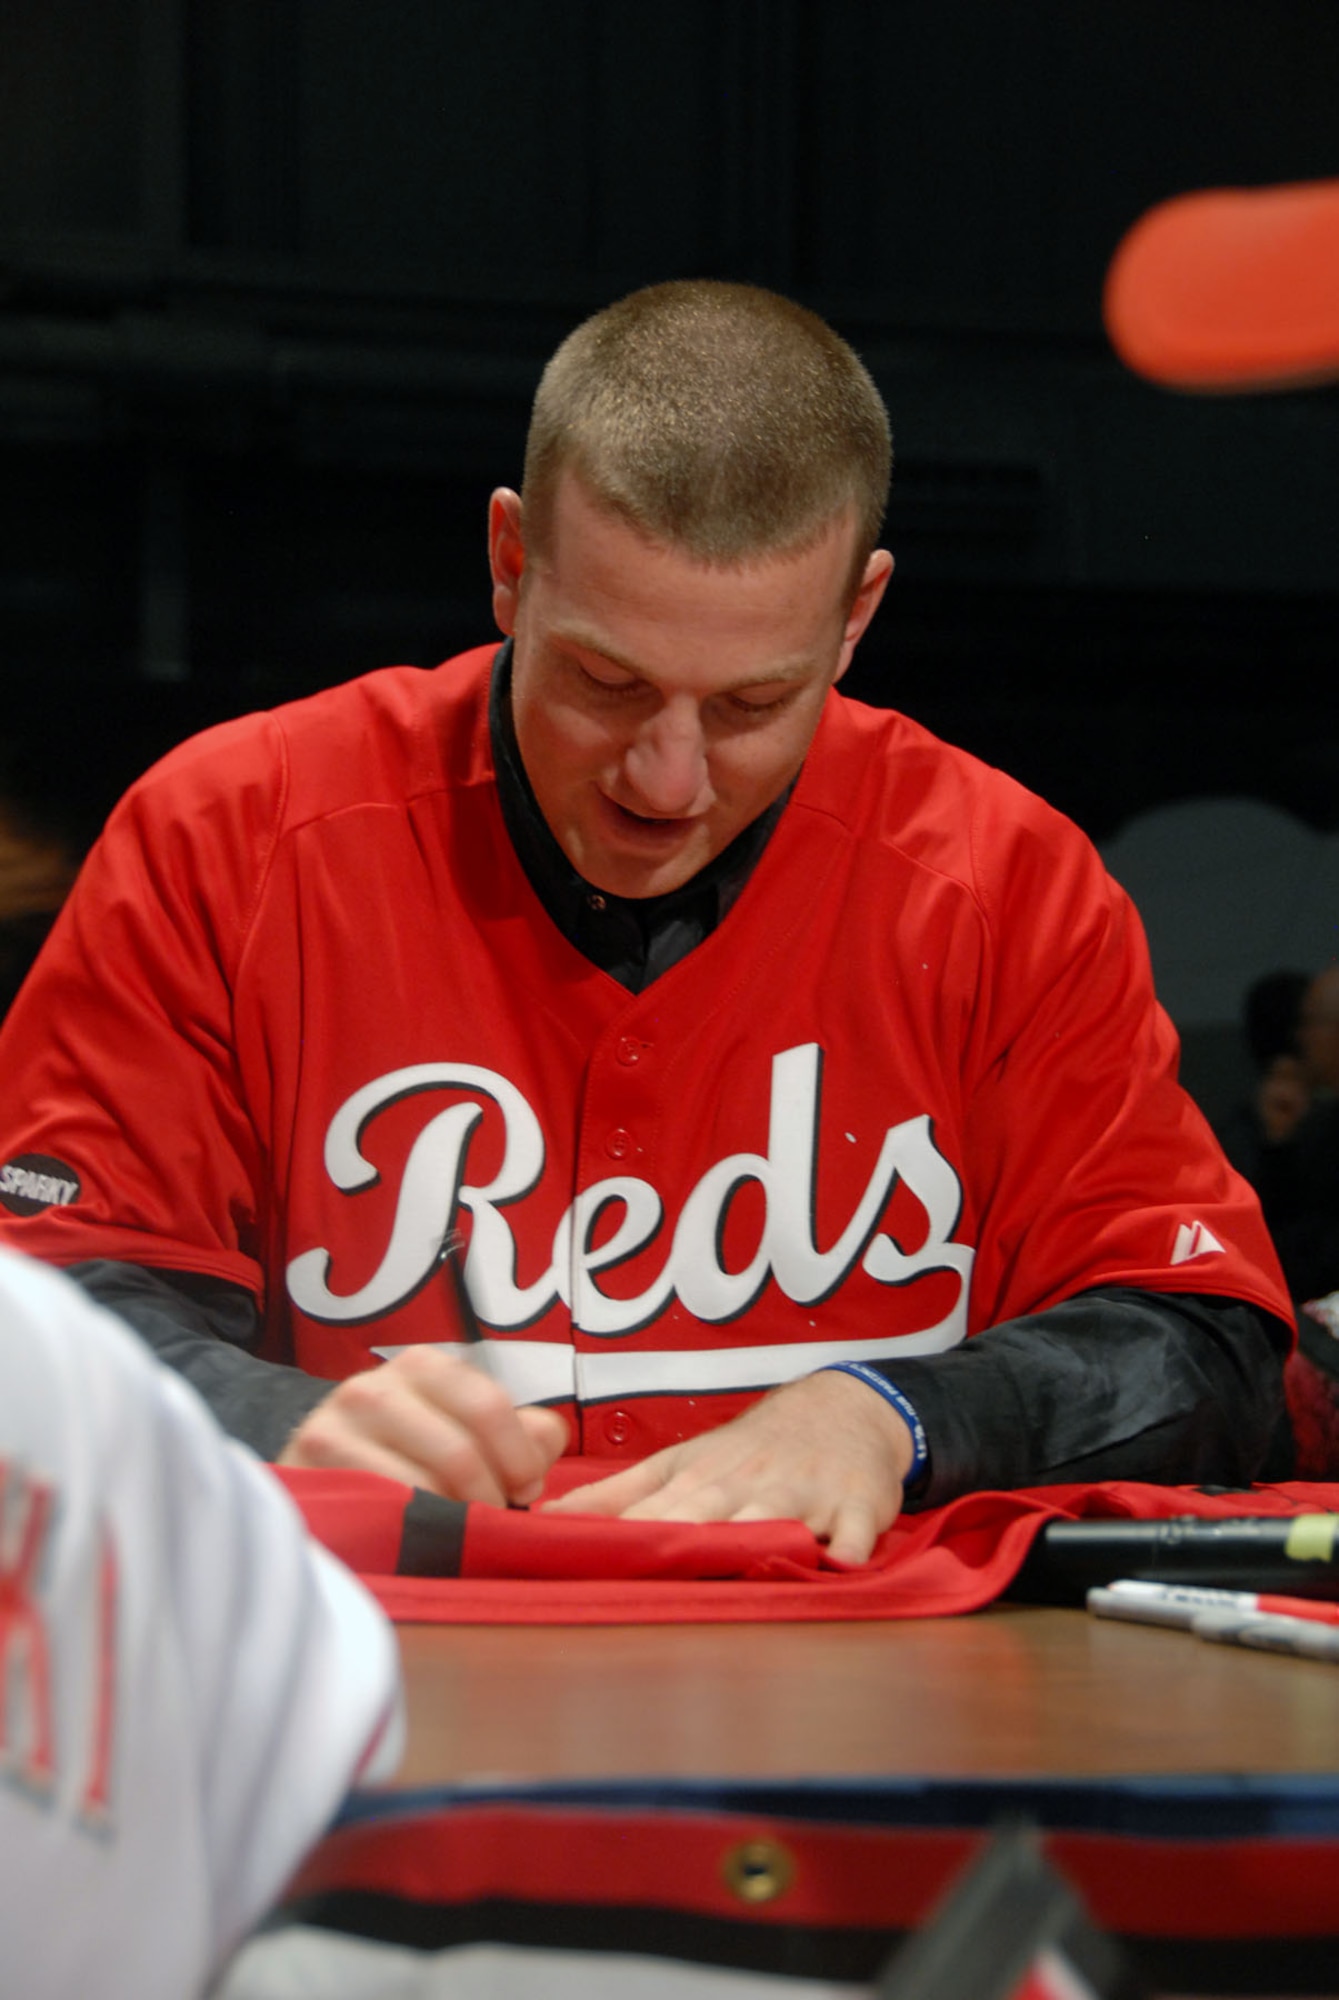 DAYTON, Ohio (01/2011) -- Fans had the chance to meet and get autographs from members of the Cincinnati Reds organization, including minor leaguer Todd Frazier, during their stop at the National Museum of the U.S. Air Force for the 2011 Reds Caravan. (U.S. Air Force photo)